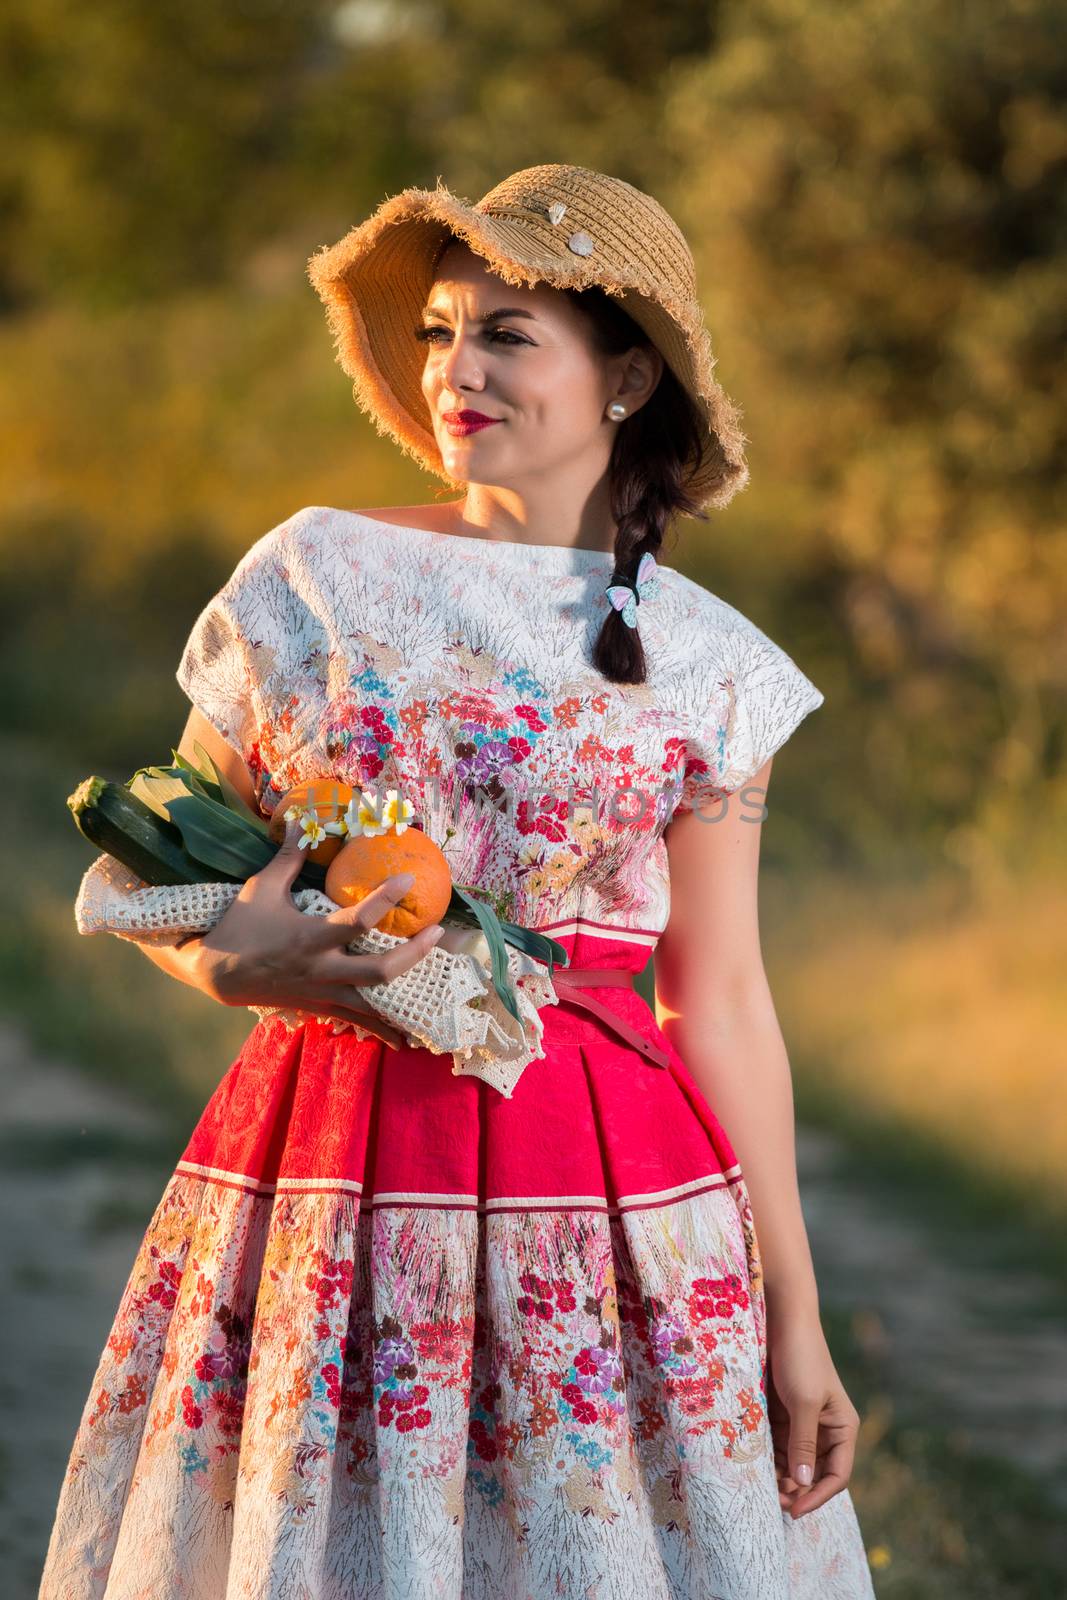 Vintage girl on the countryside with wicker hat gathering groceries.